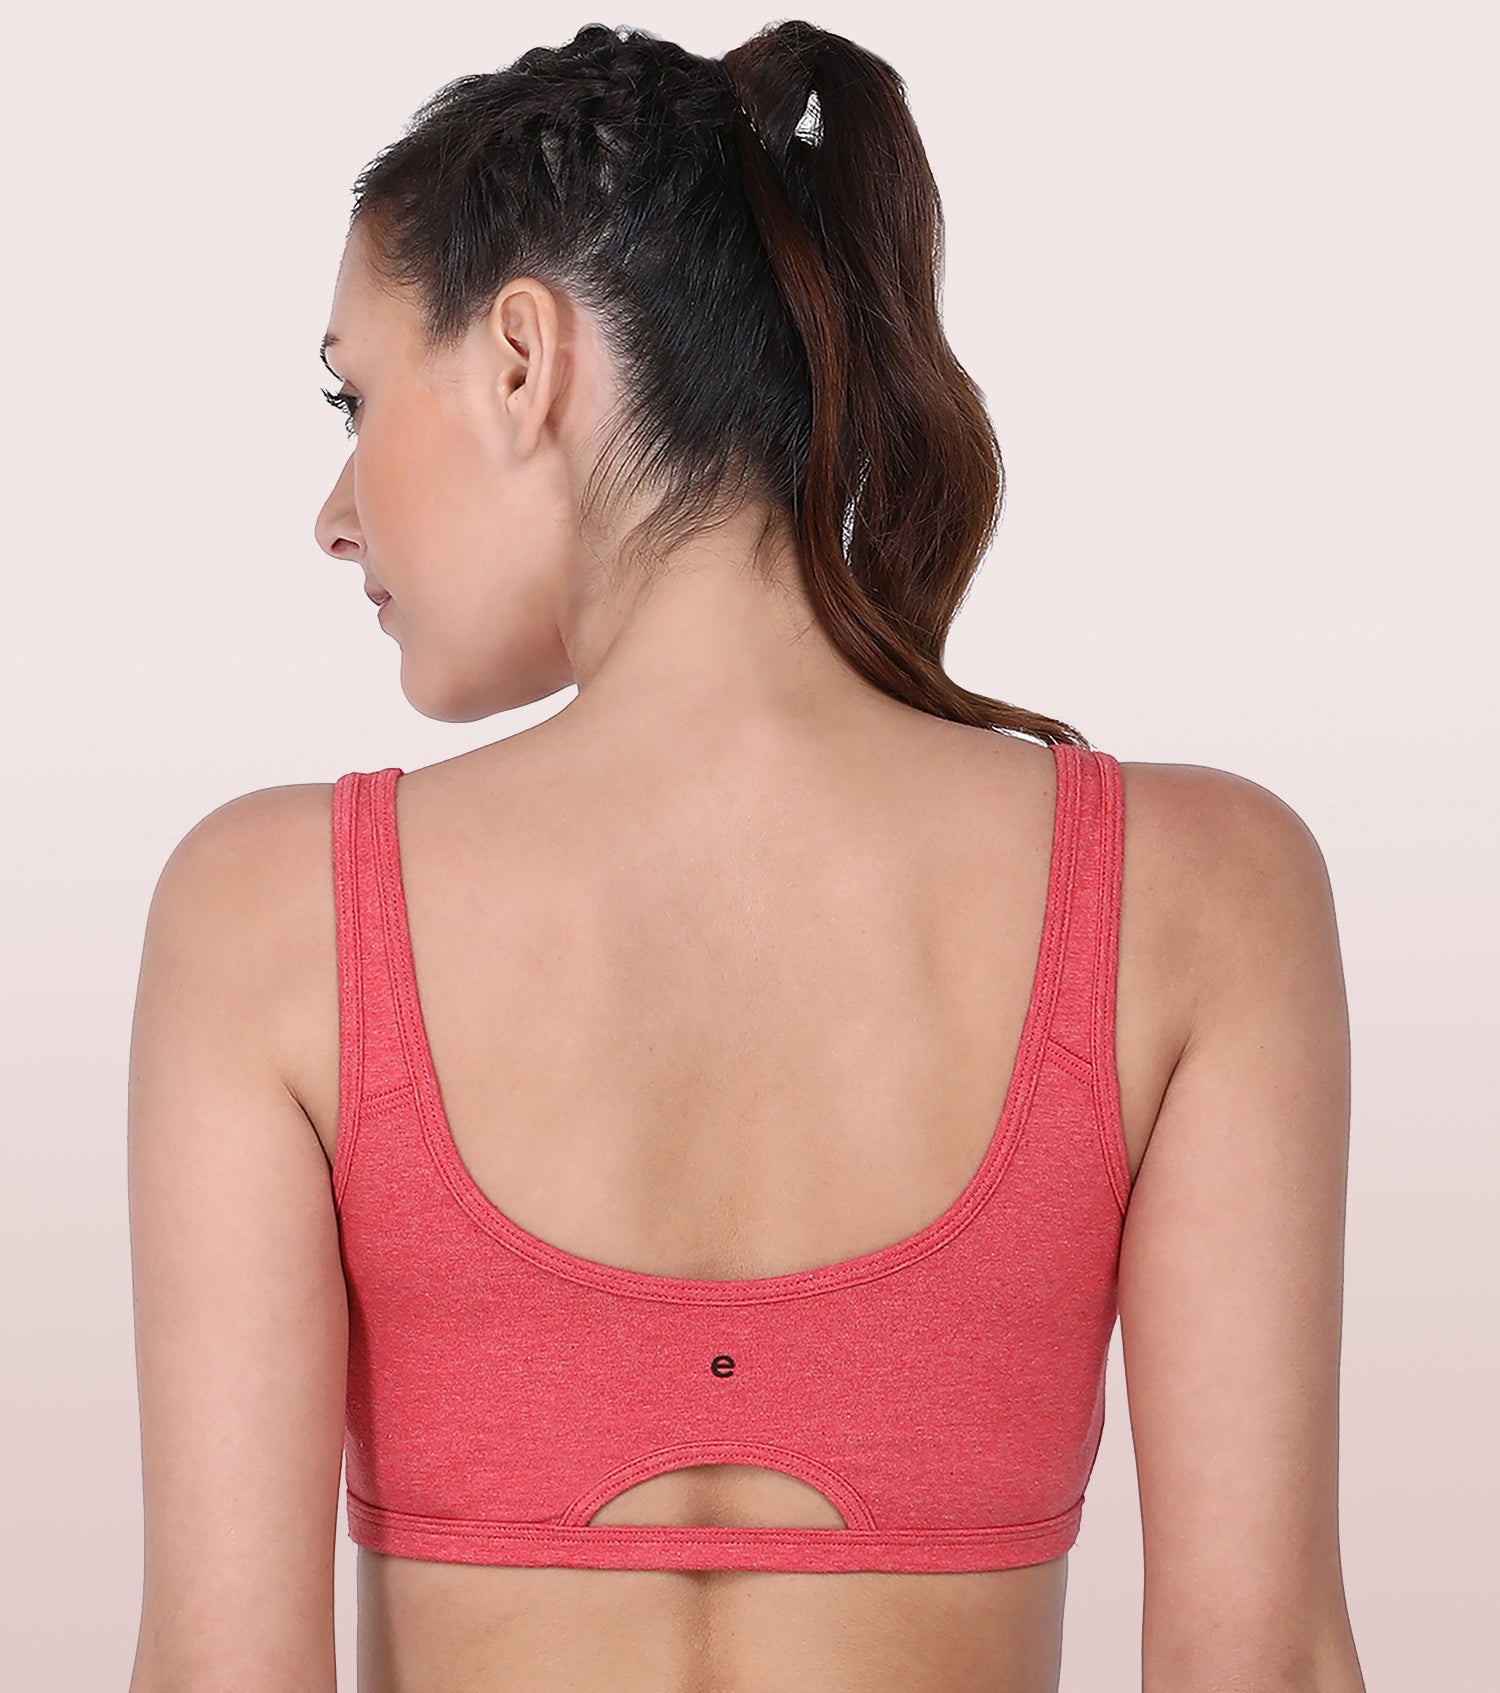 Buy Enamor SB06 Low Impact Non-Padded, Wirefree & High Coverage Sports Bra  - Black online